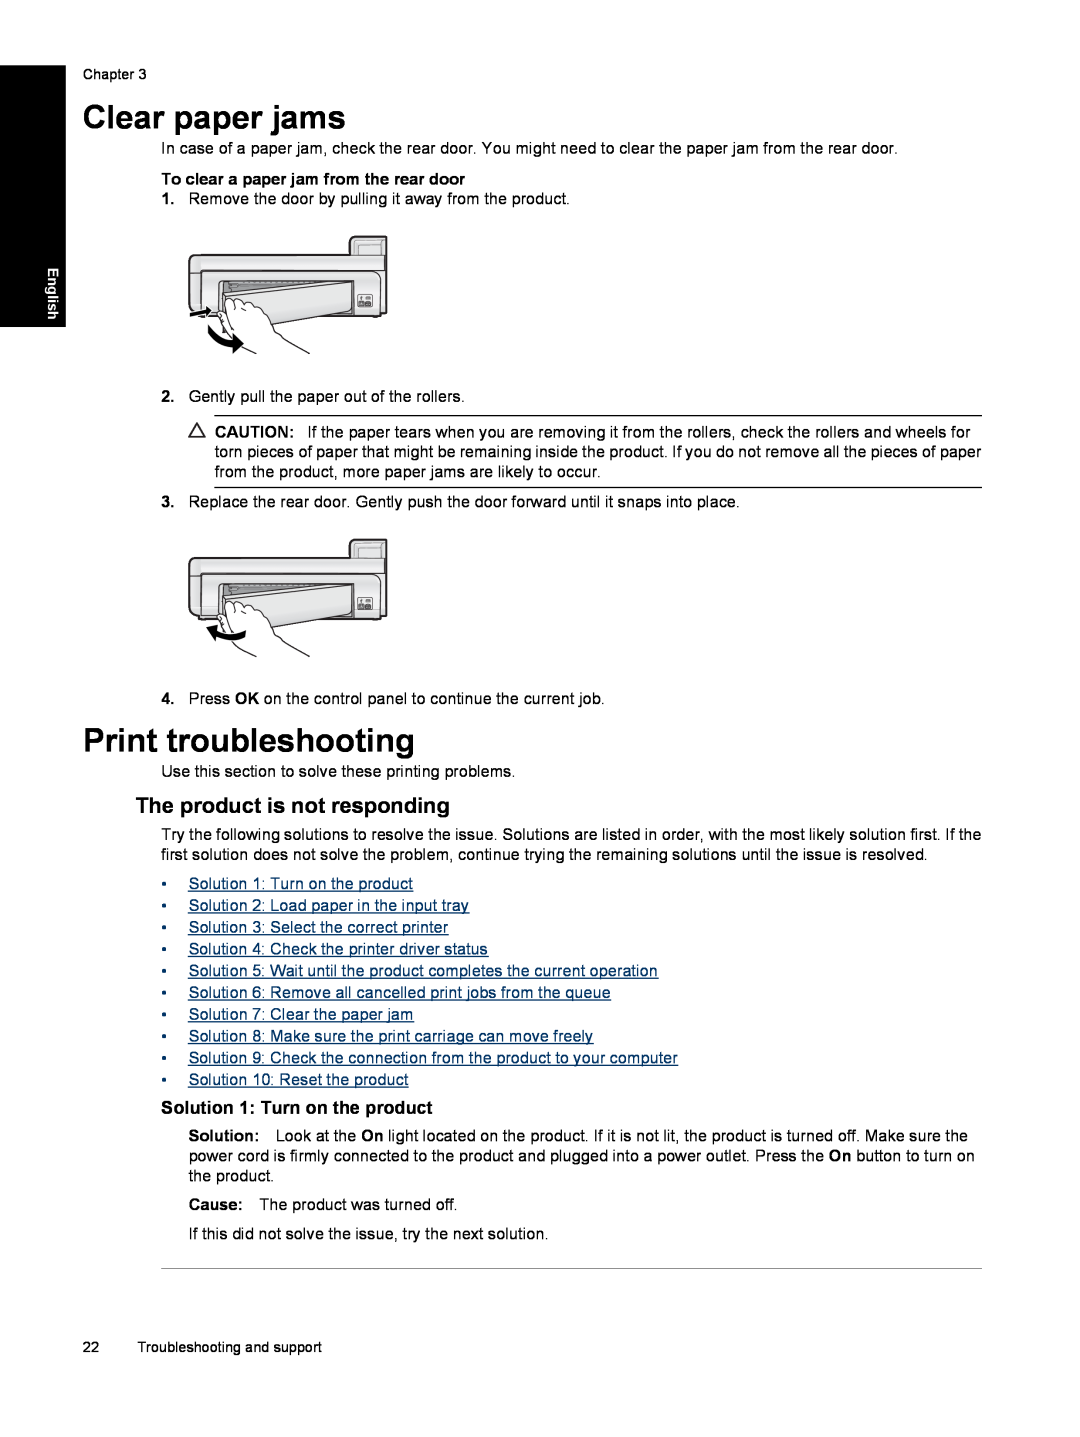 HP B8550 manual Clear paper jams, Print troubleshooting, The product is not responding, Solution 1 Turn on the product 